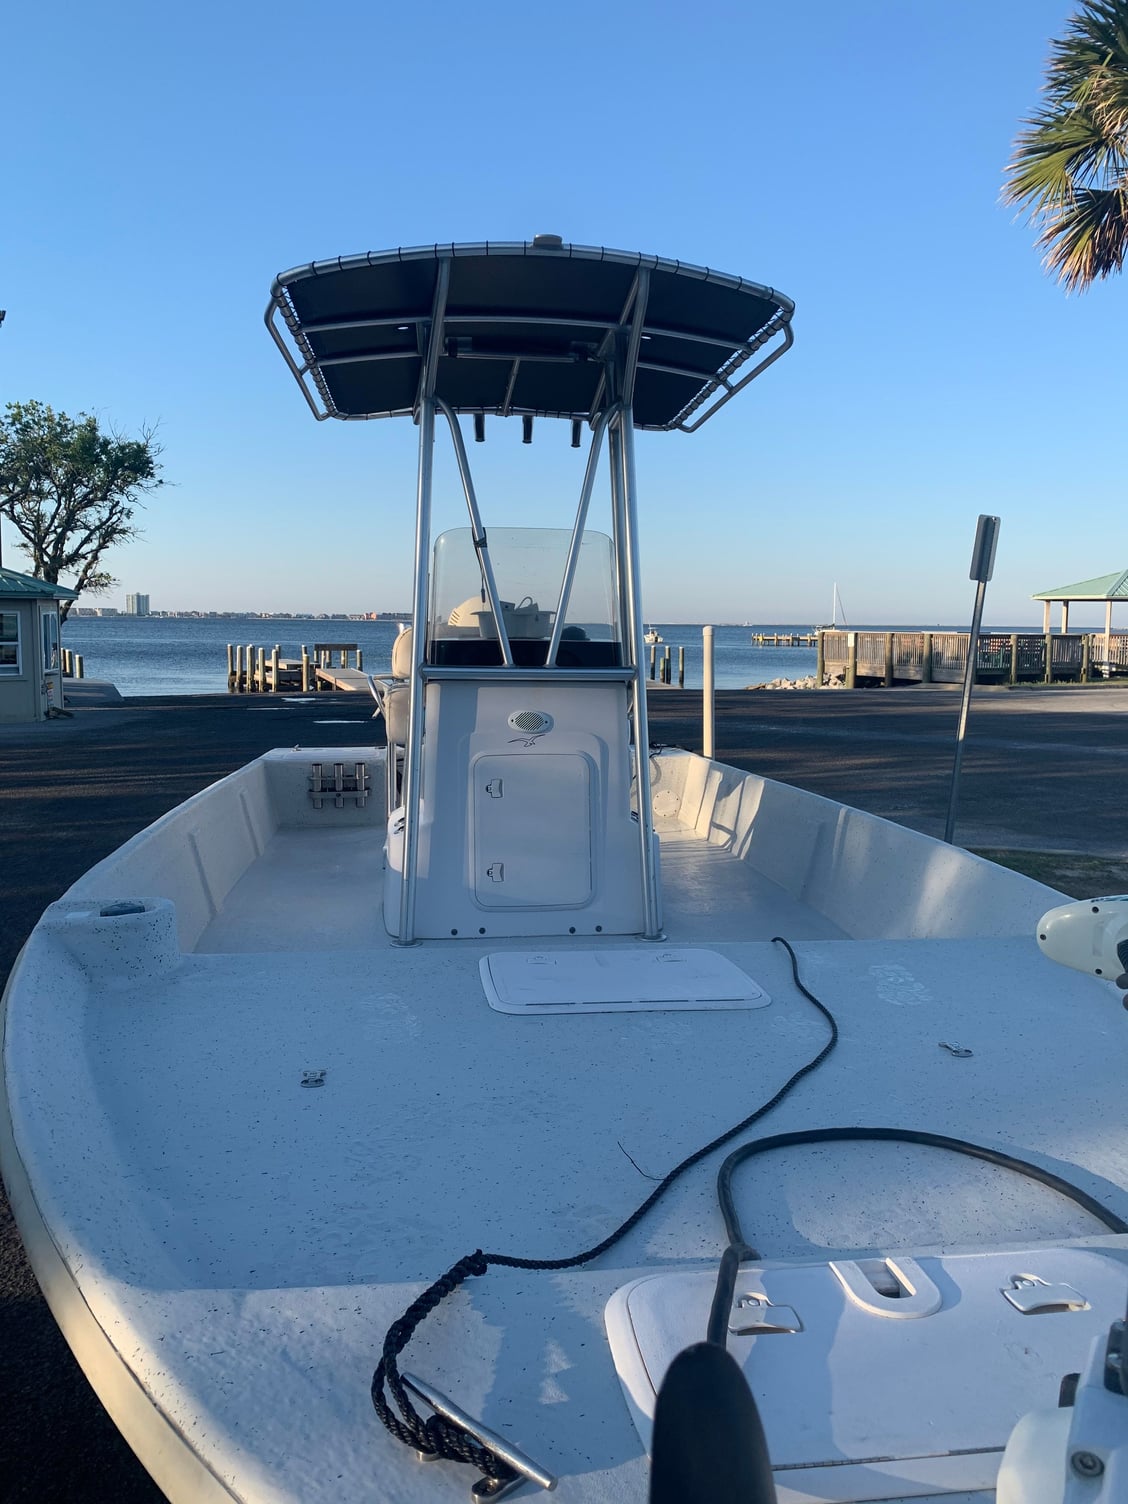 22 pro lite bay boat - The Hull Truth - Boating and Fishing Forum